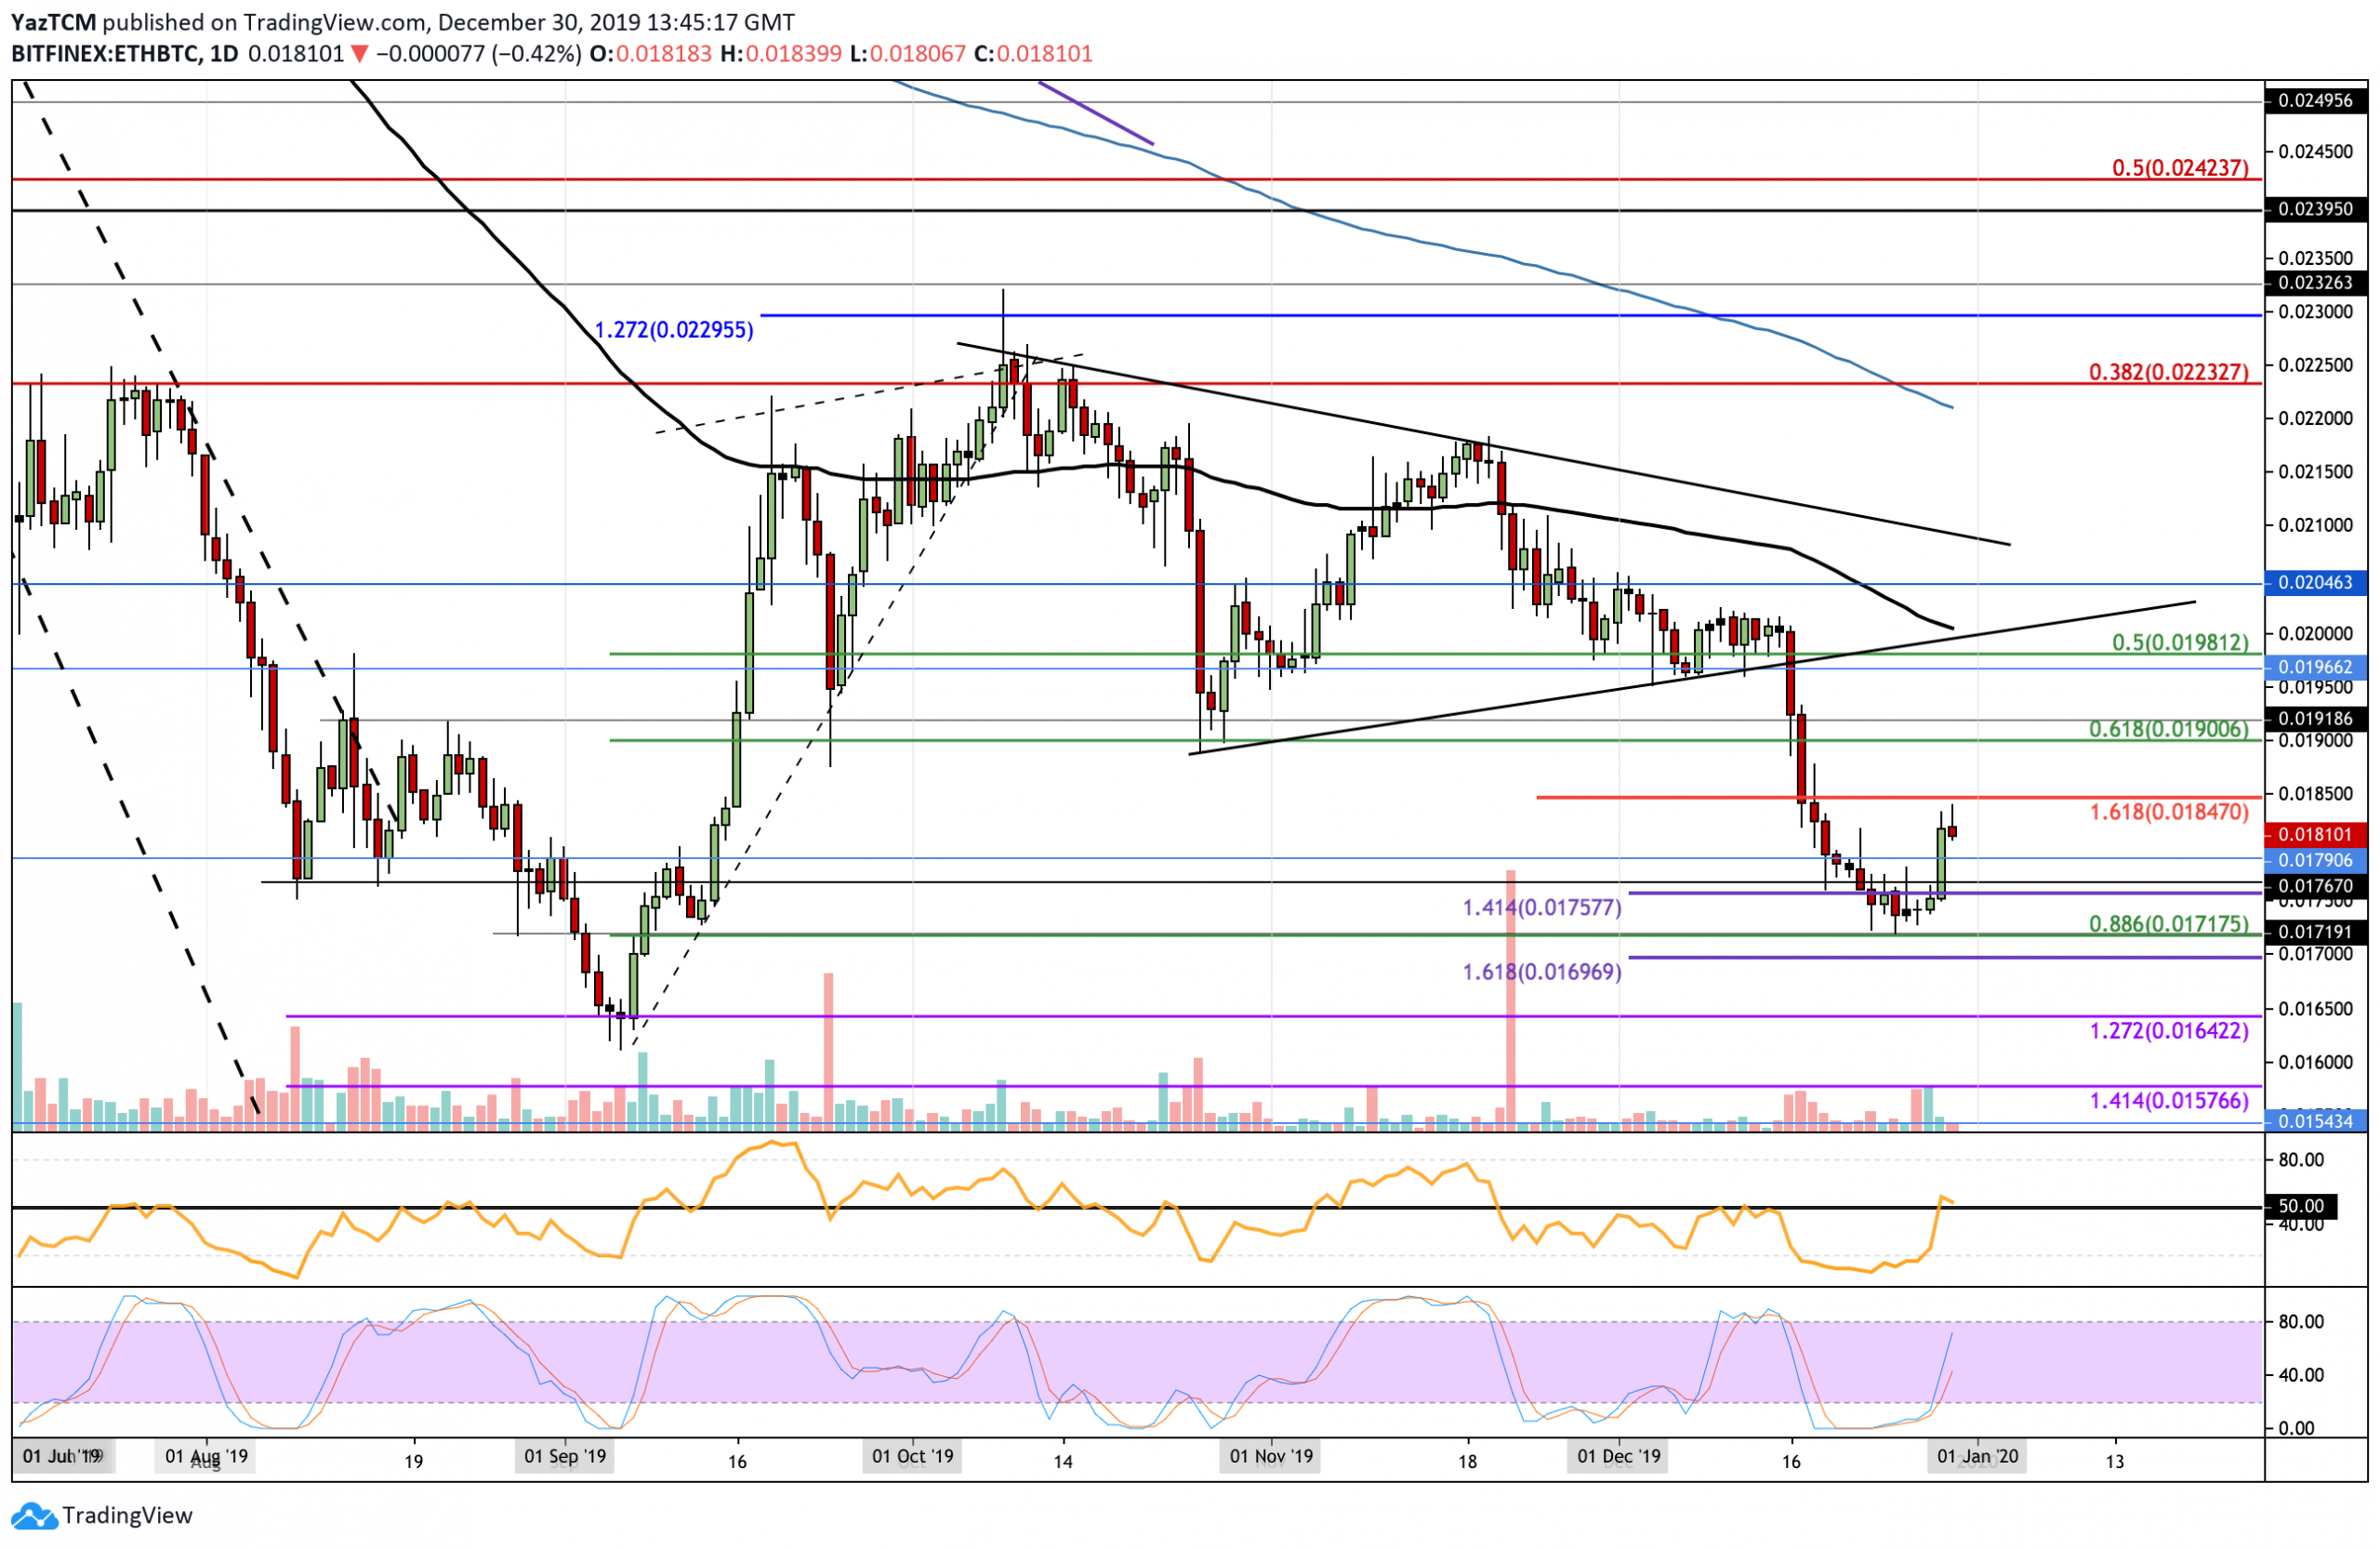 Ethereum Price Analysis: ETH Back Above $130, Can 2019 Ends In Favor of The Bulls?